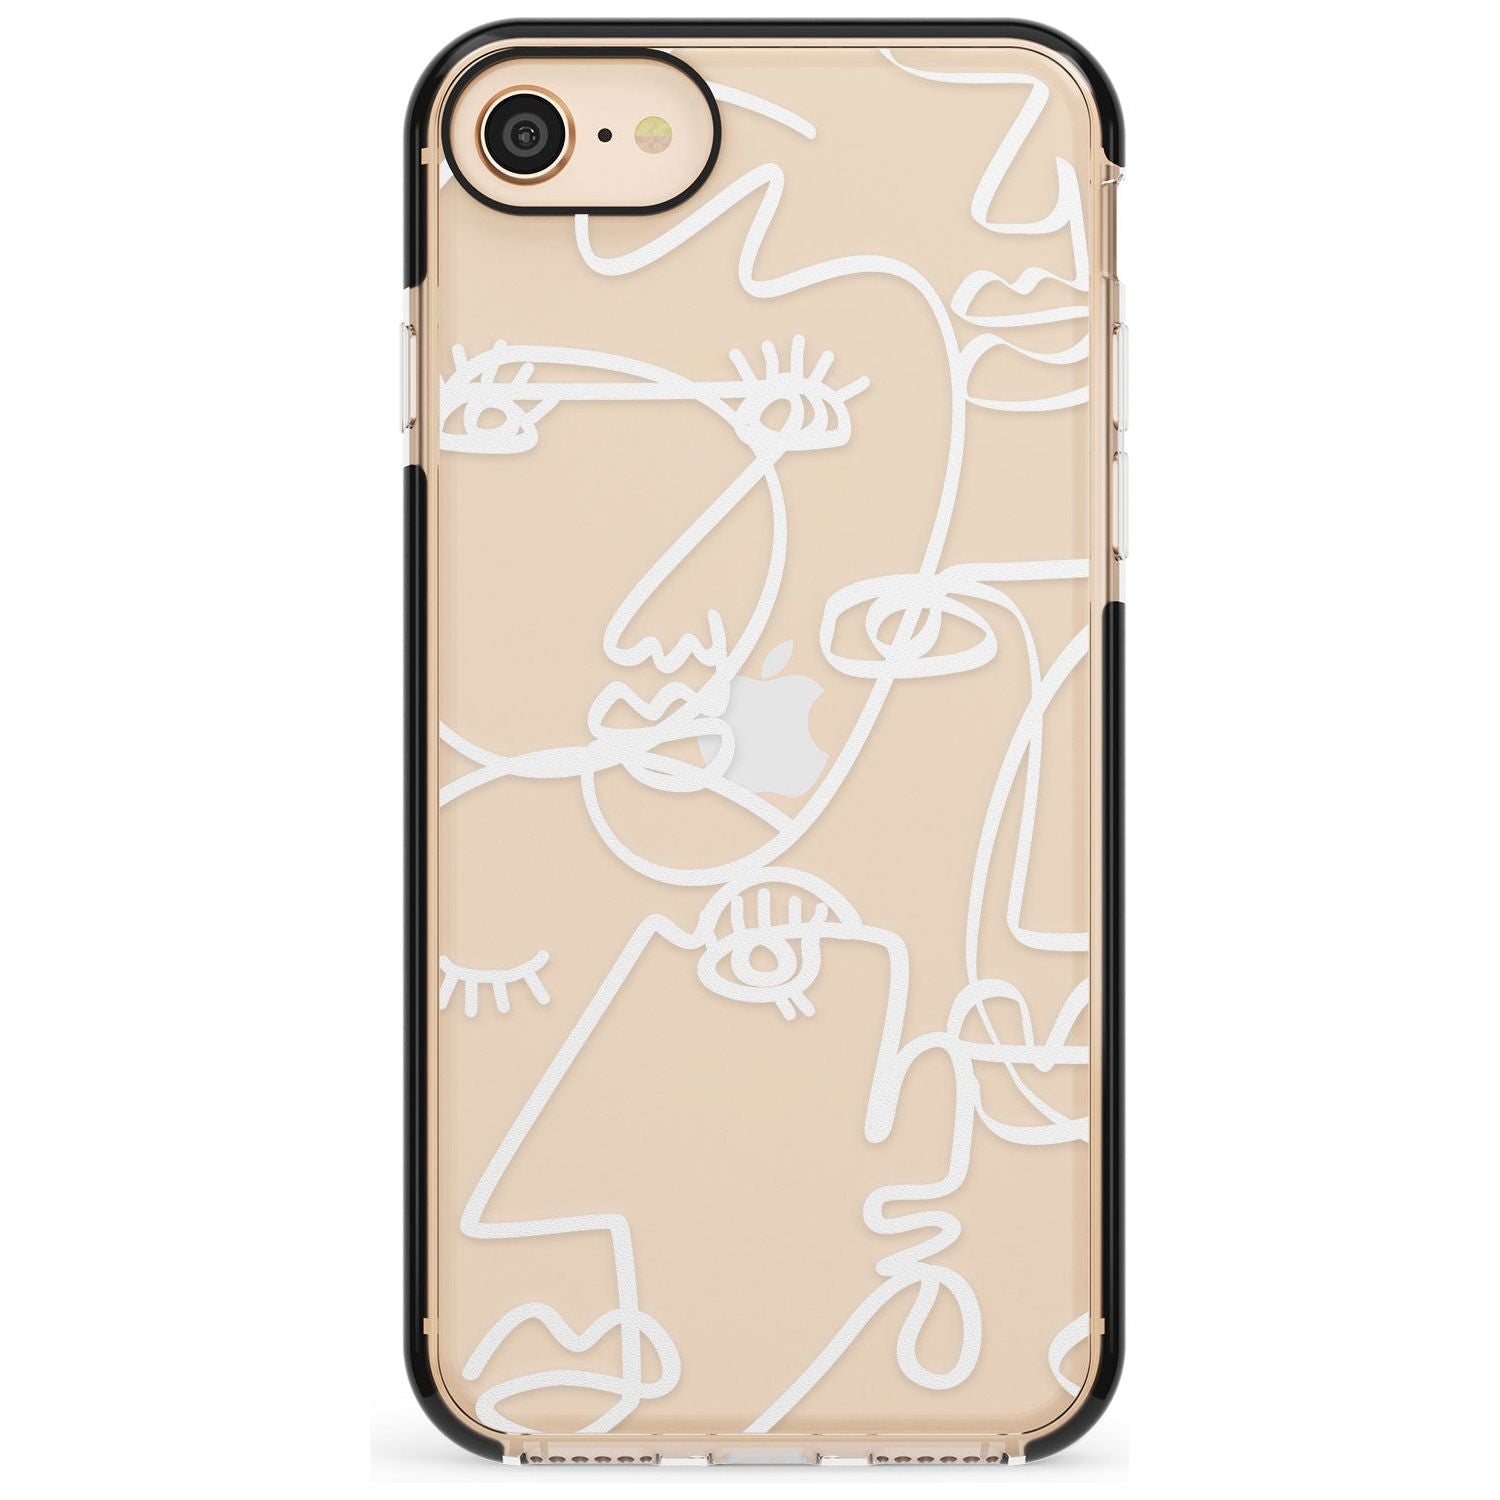 Continuous Line Faces: White on Clear Pink Fade Impact Phone Case for iPhone SE 8 7 Plus